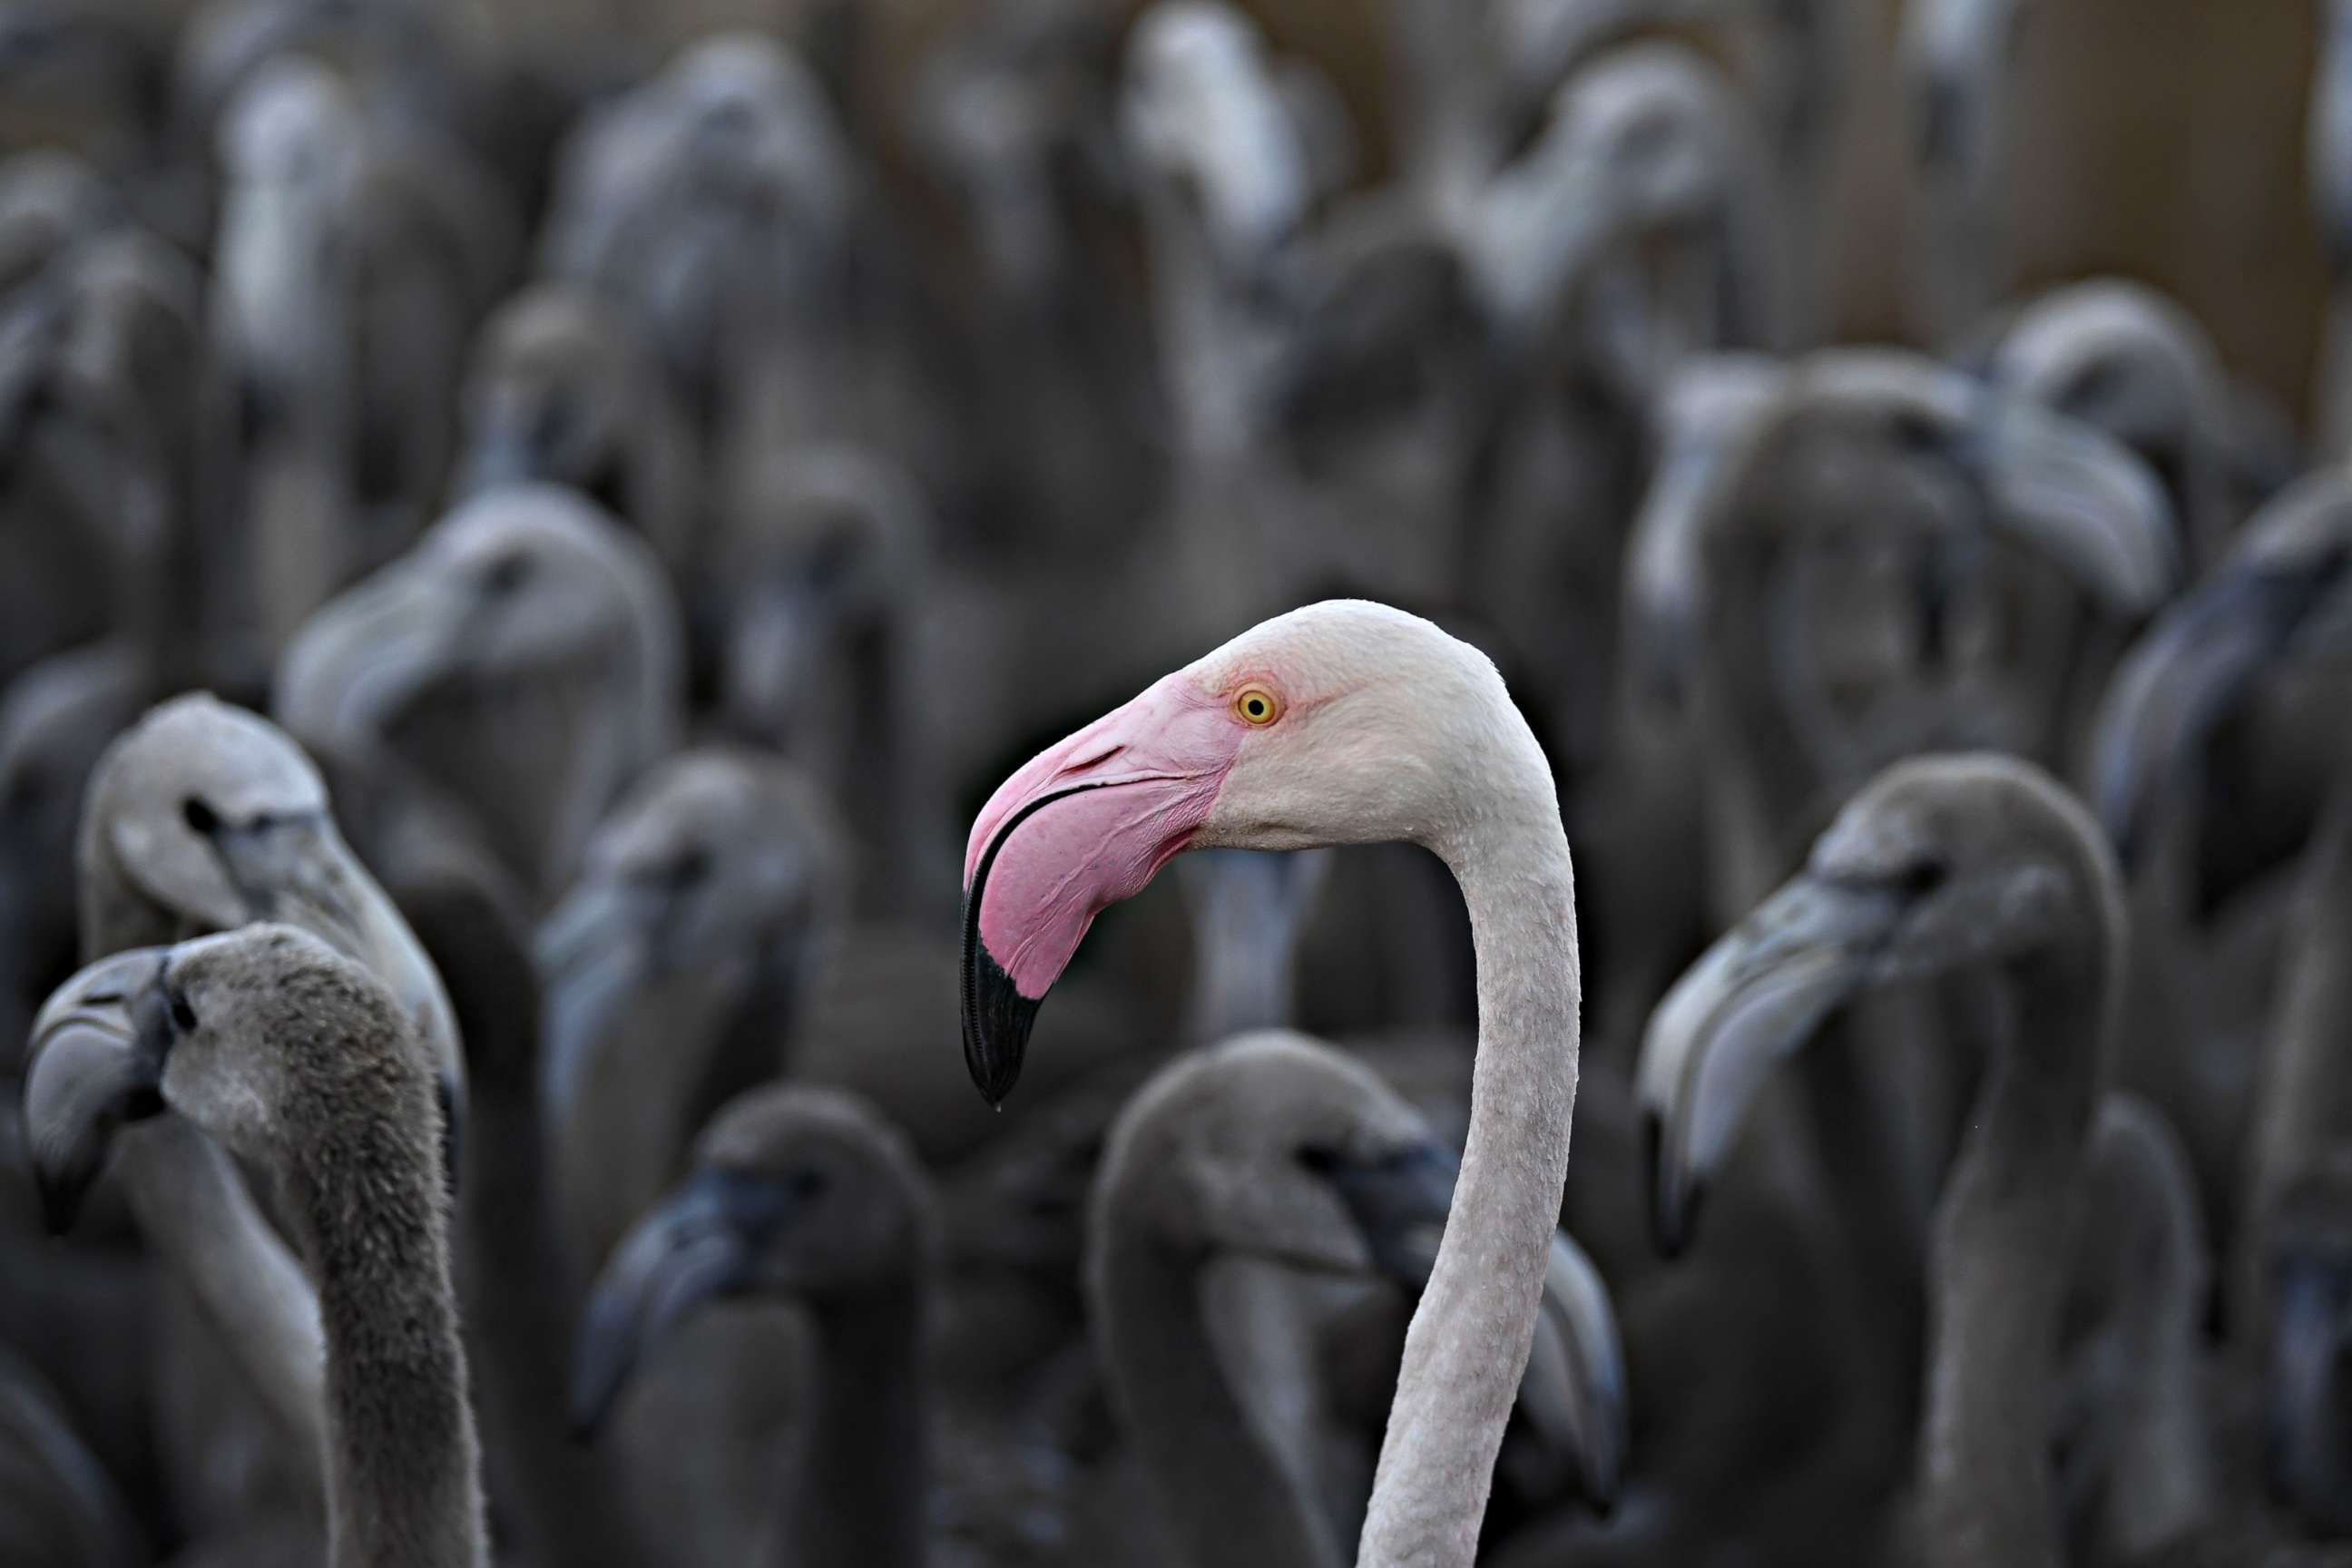 PHOTO: The number of pink flamingos may be the highest since experts began keeping records 45 years ago, said Thierry Marmol, guardian of the lands. France's two months of strict confinement may well be the reason.